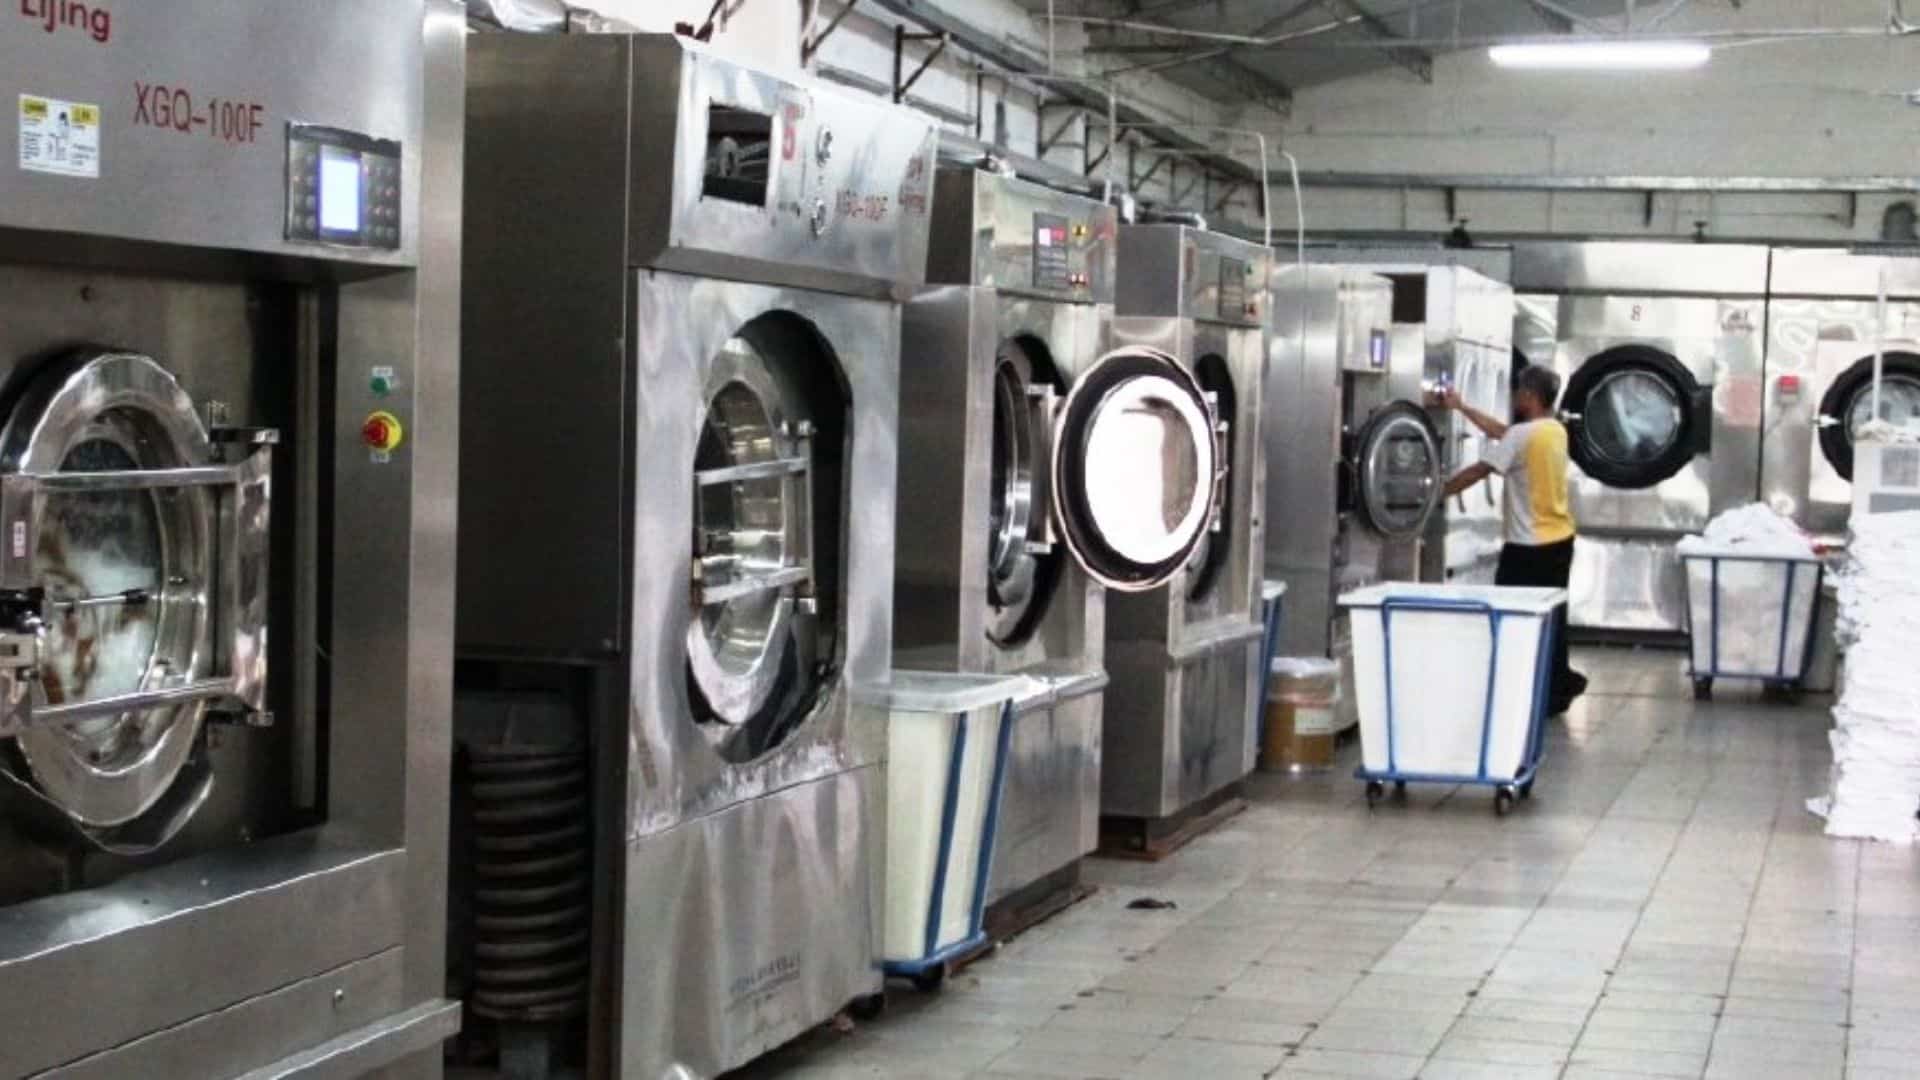 Profеssional Laundry Sеrvicеs in Discovеry Gardеns